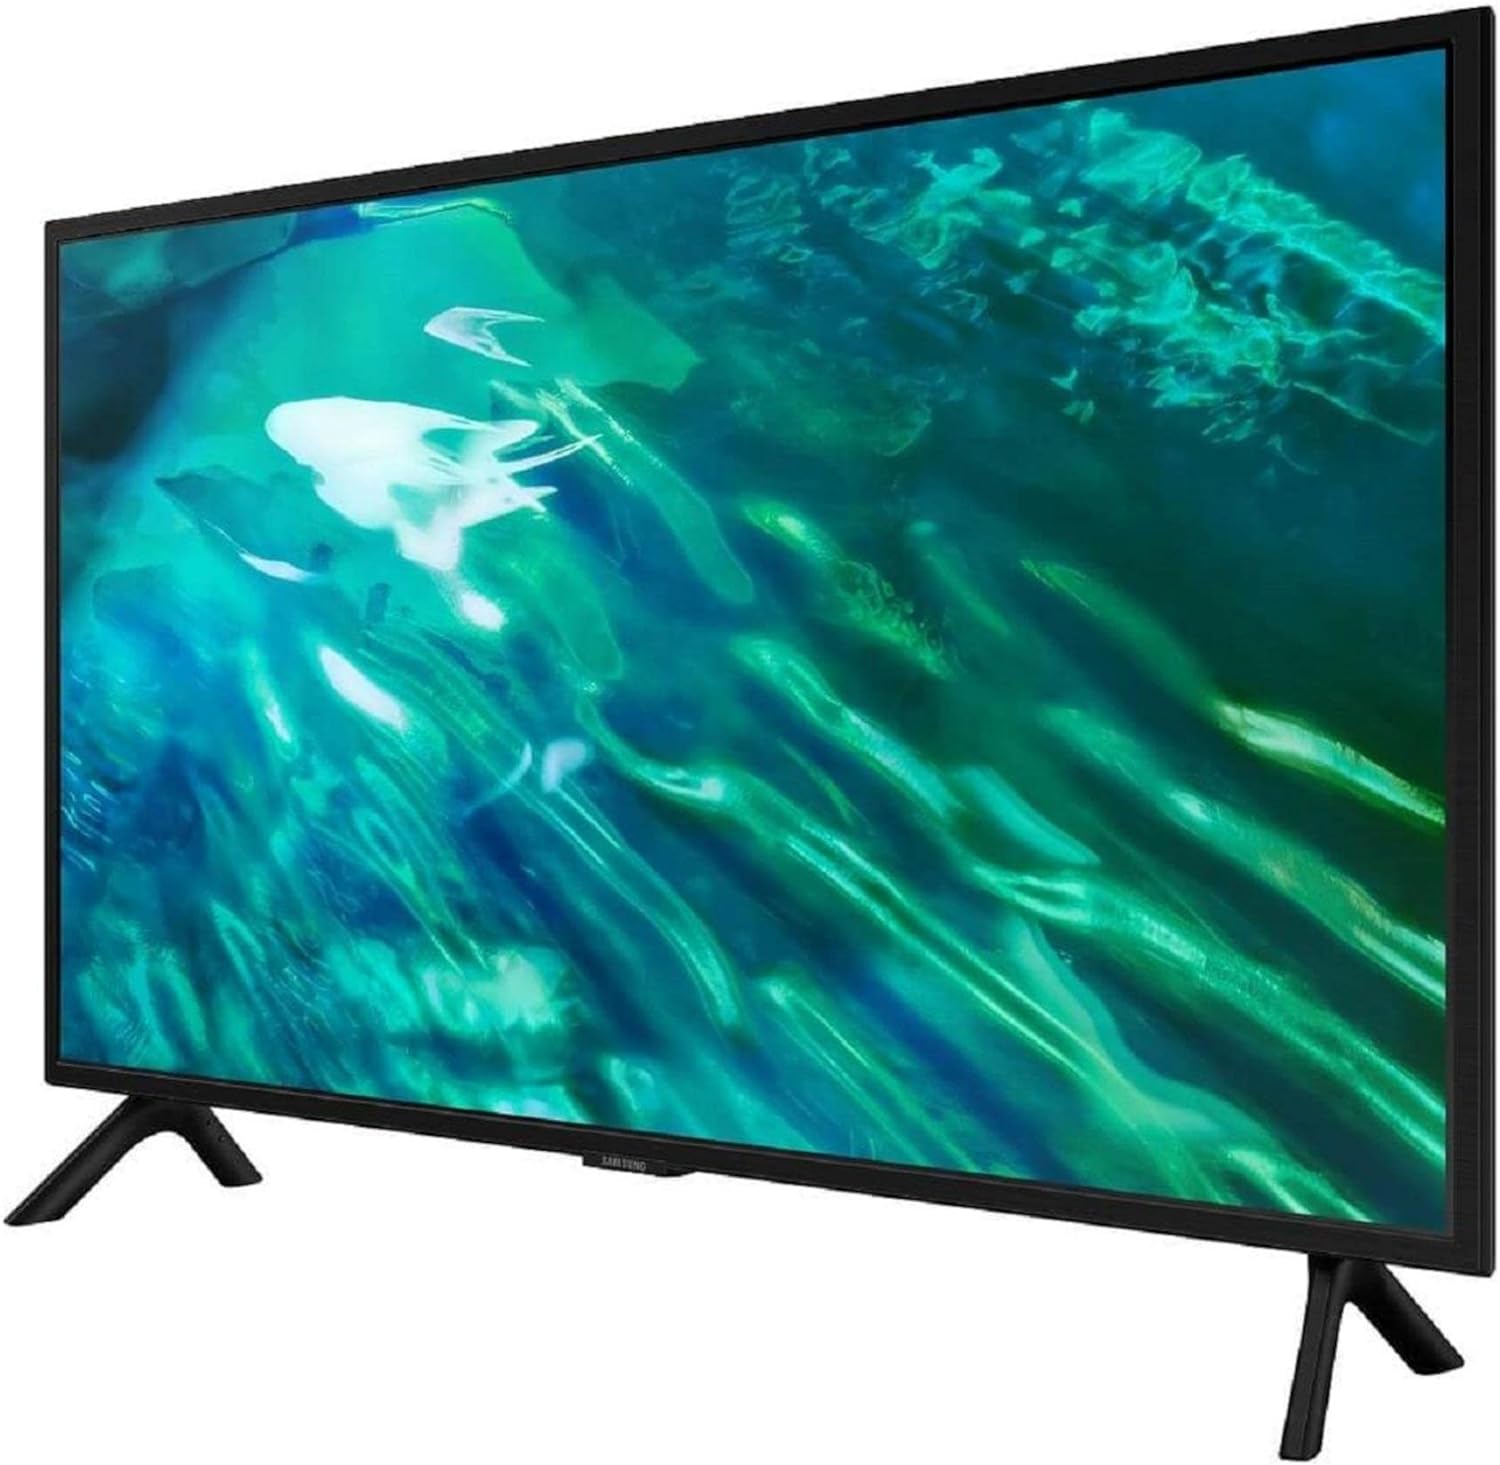 Samsung QE32Q50AE 32 inch Full HD TV with Smart Tizen Platform   Import  Single ASIN  Import  Multiple ASIN ×Product customization General Description Gallery Reviews Variations Additional details Product Tags AMAZON VERIFICATIO - Amazing Gadgets Outlet